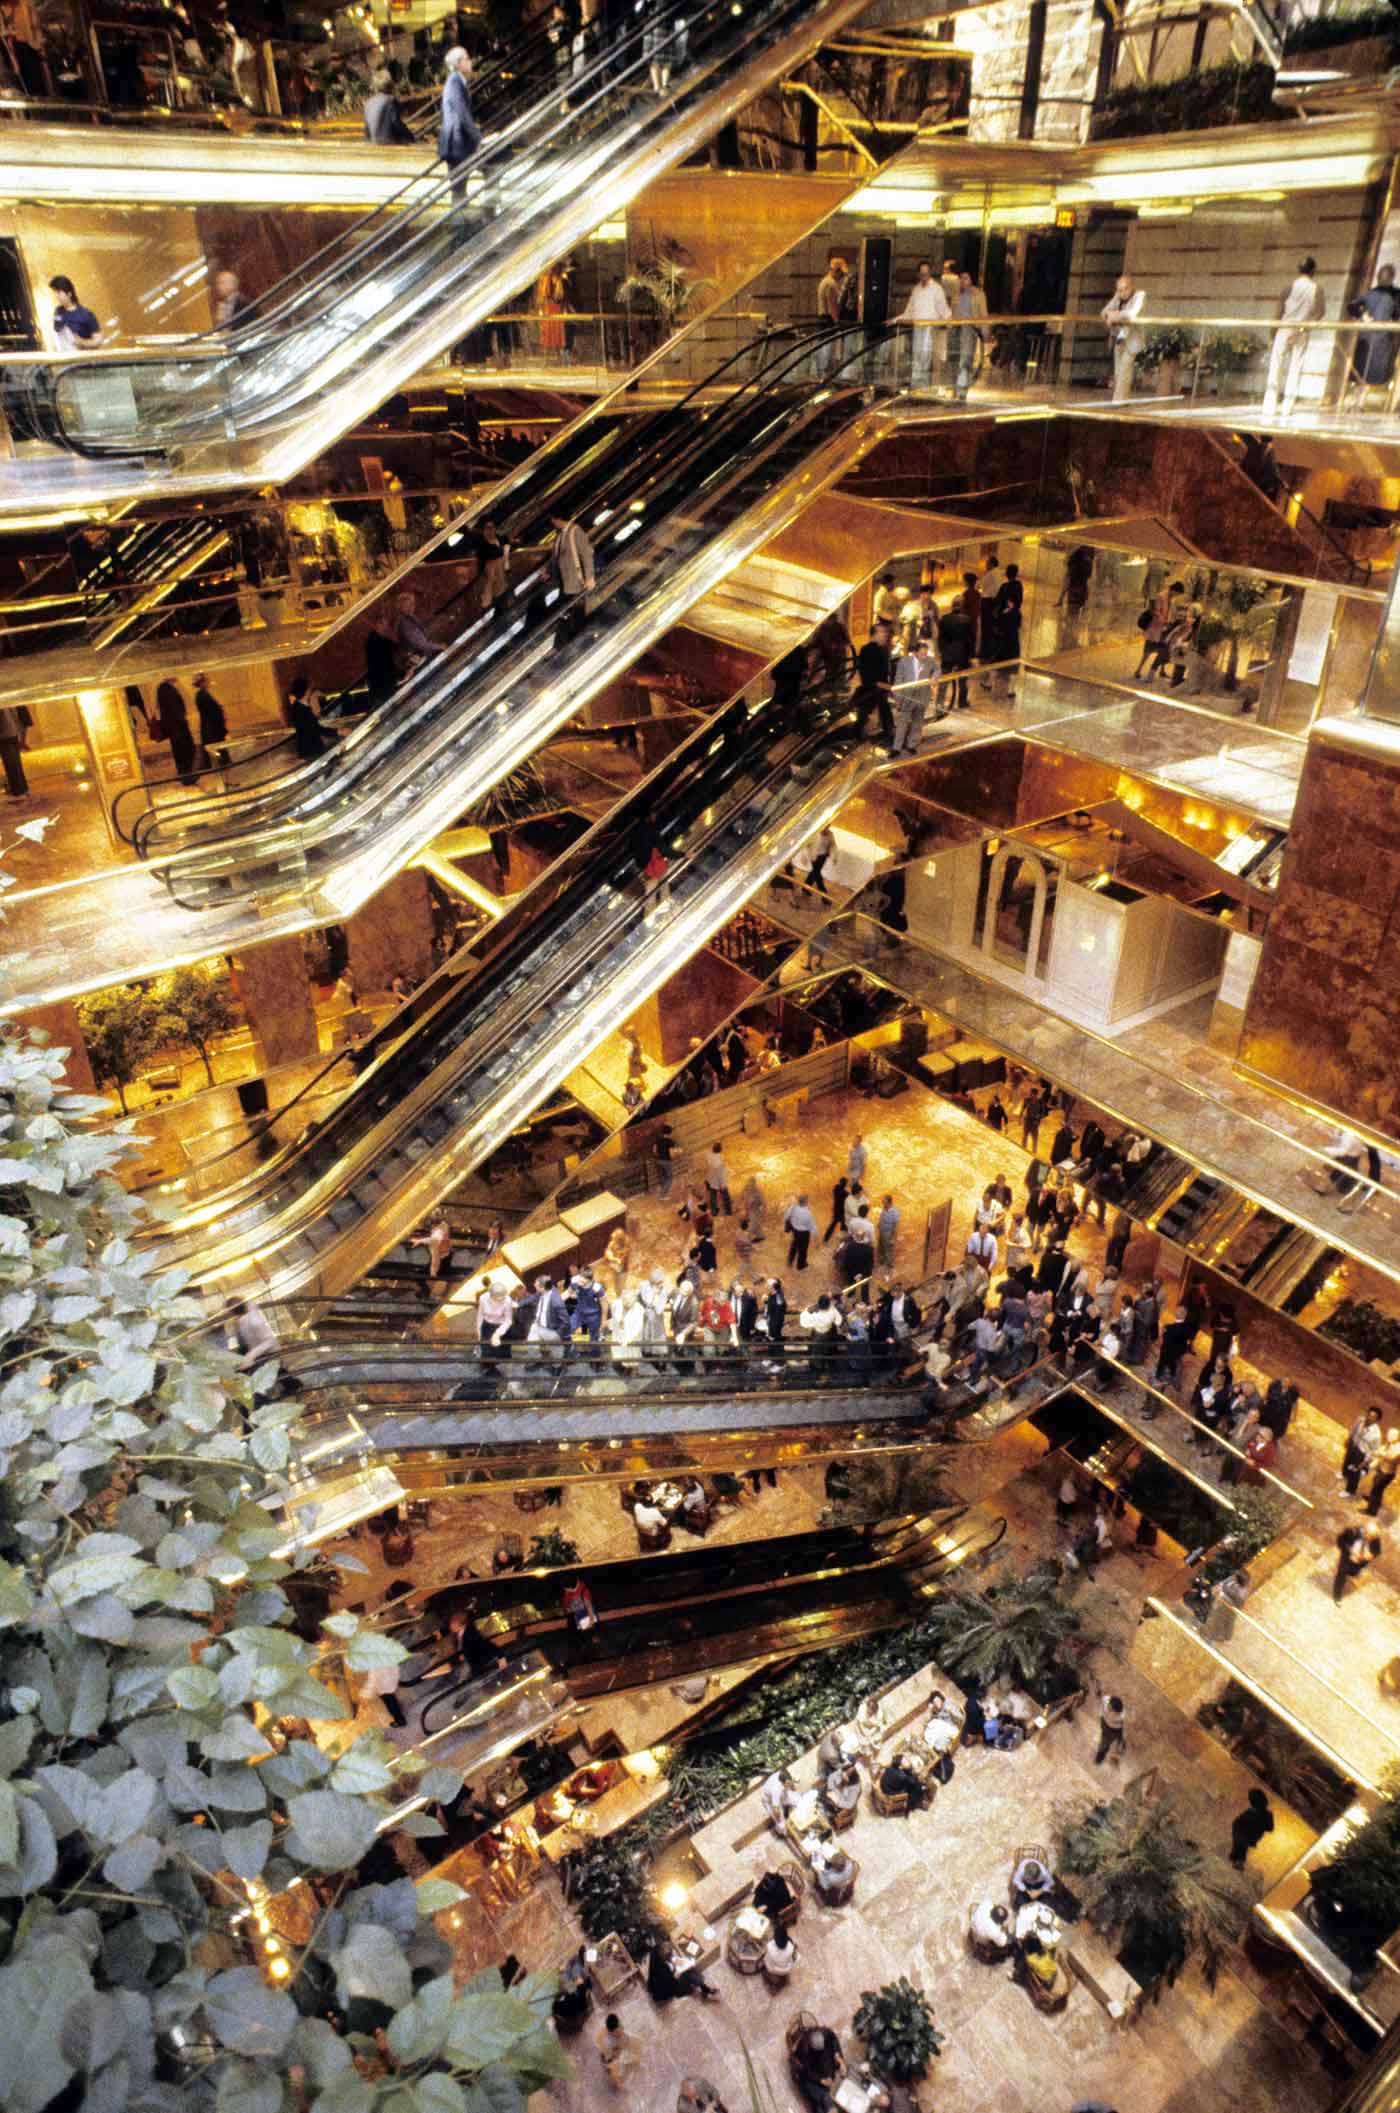 Interior view of the Trump Tower, showing its many escalators, on 28 August 1985